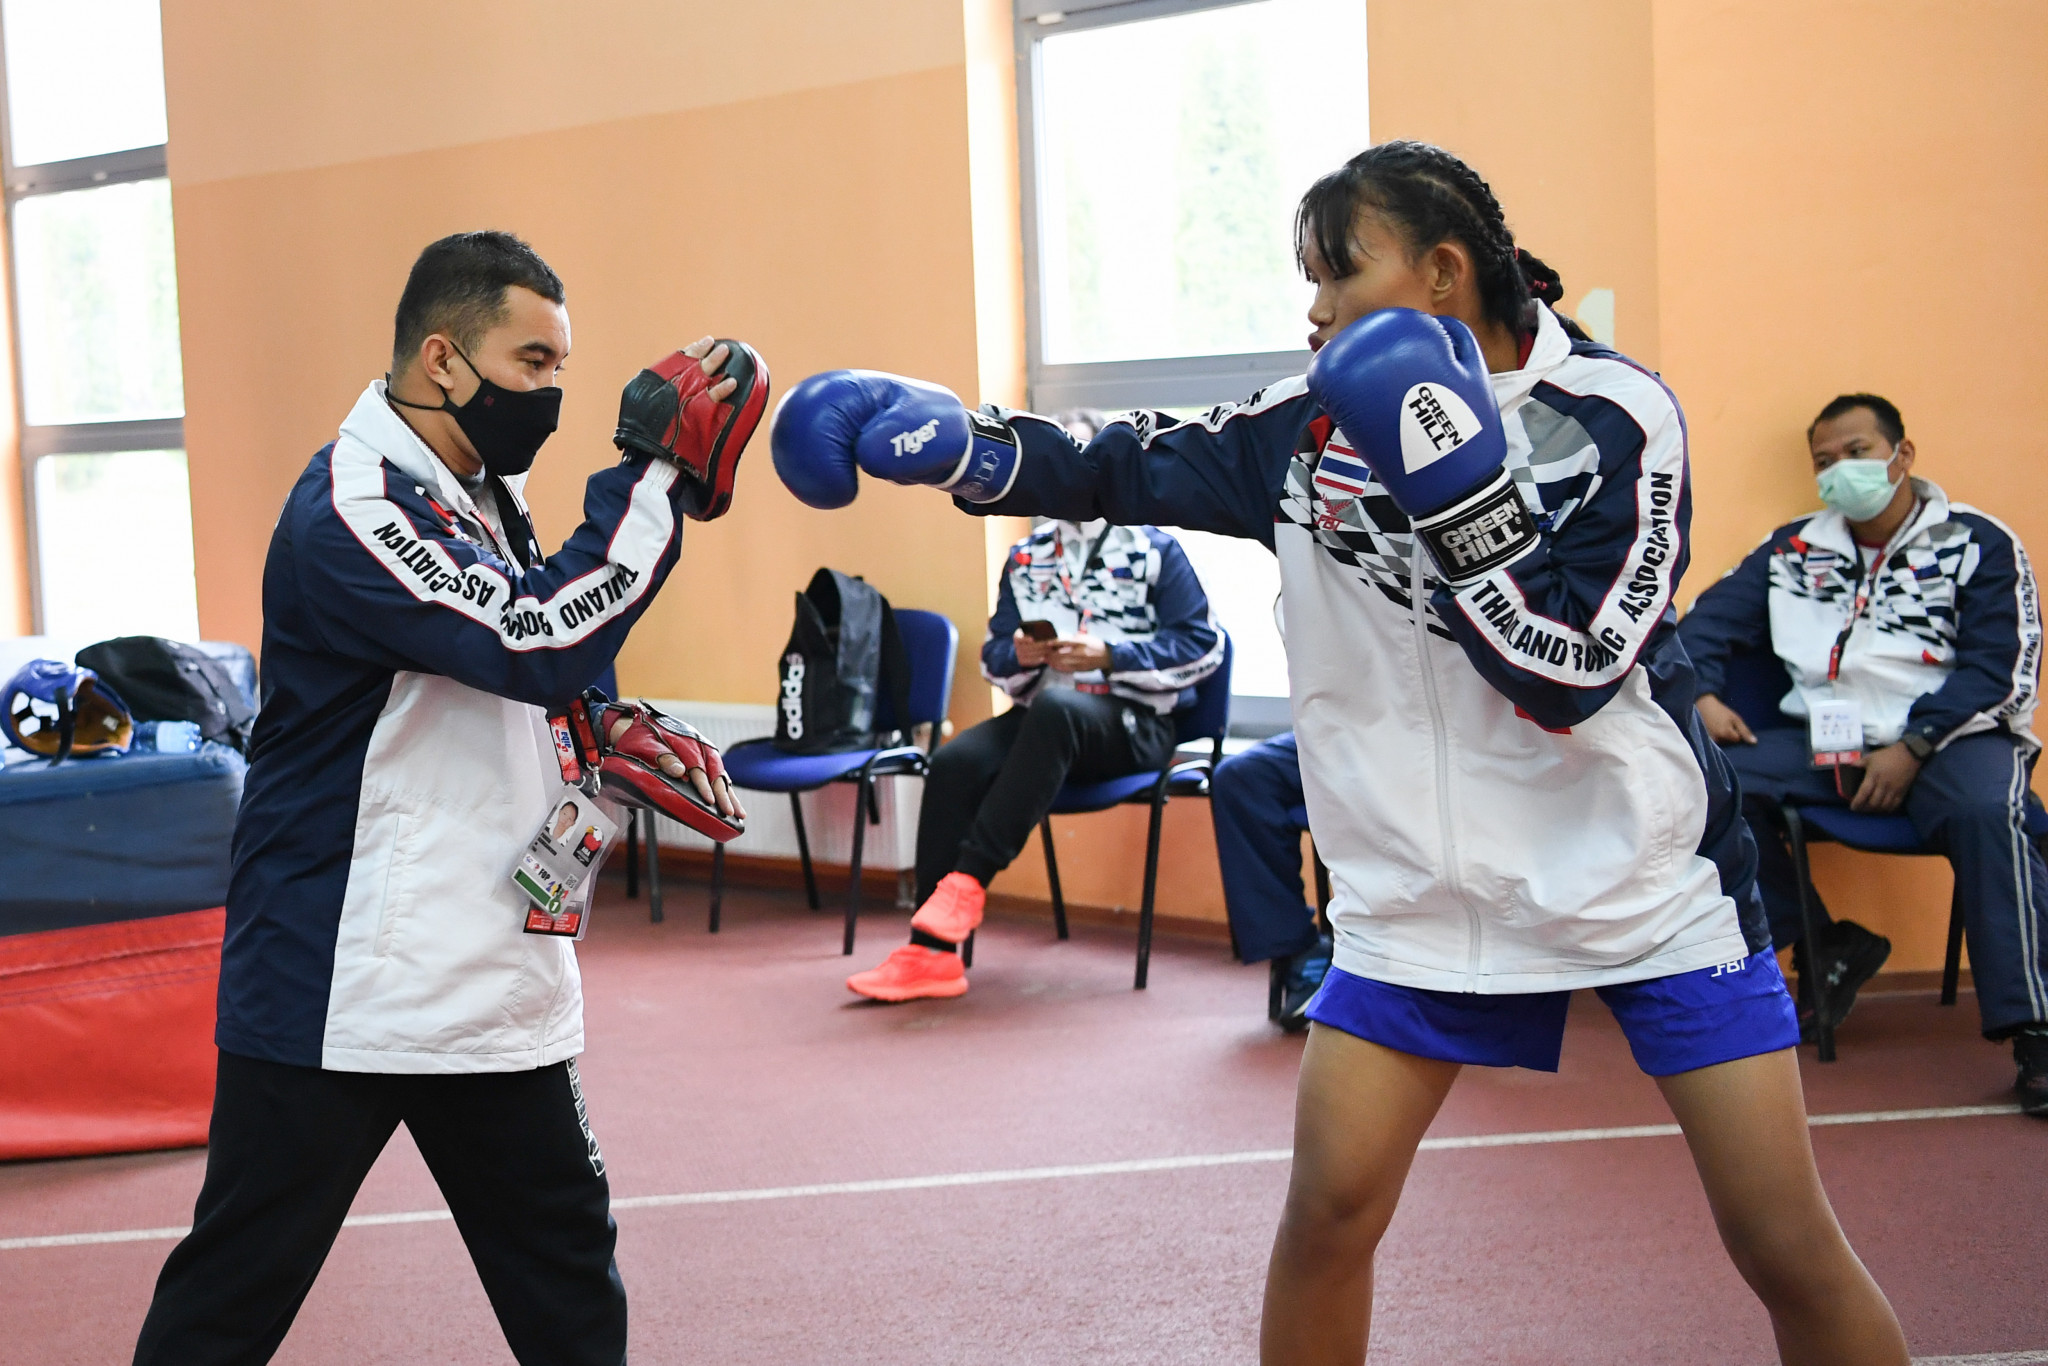 A boxer from Thailand warms up with her support team backstage at the AIBA Youth World Championships ©AIBA